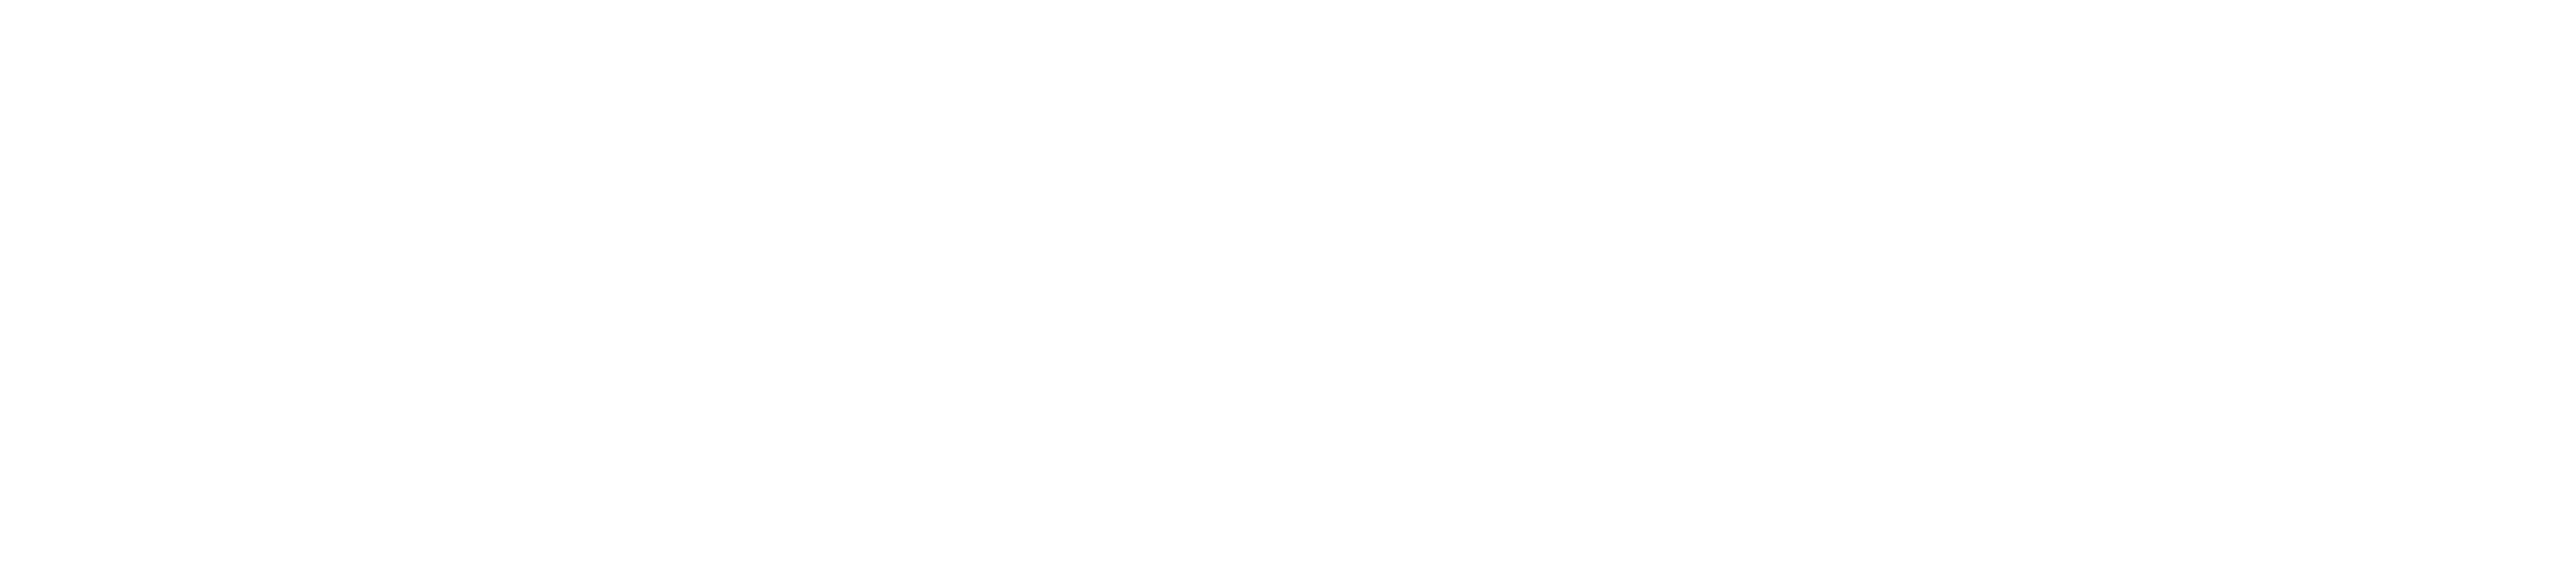 The Connect Program